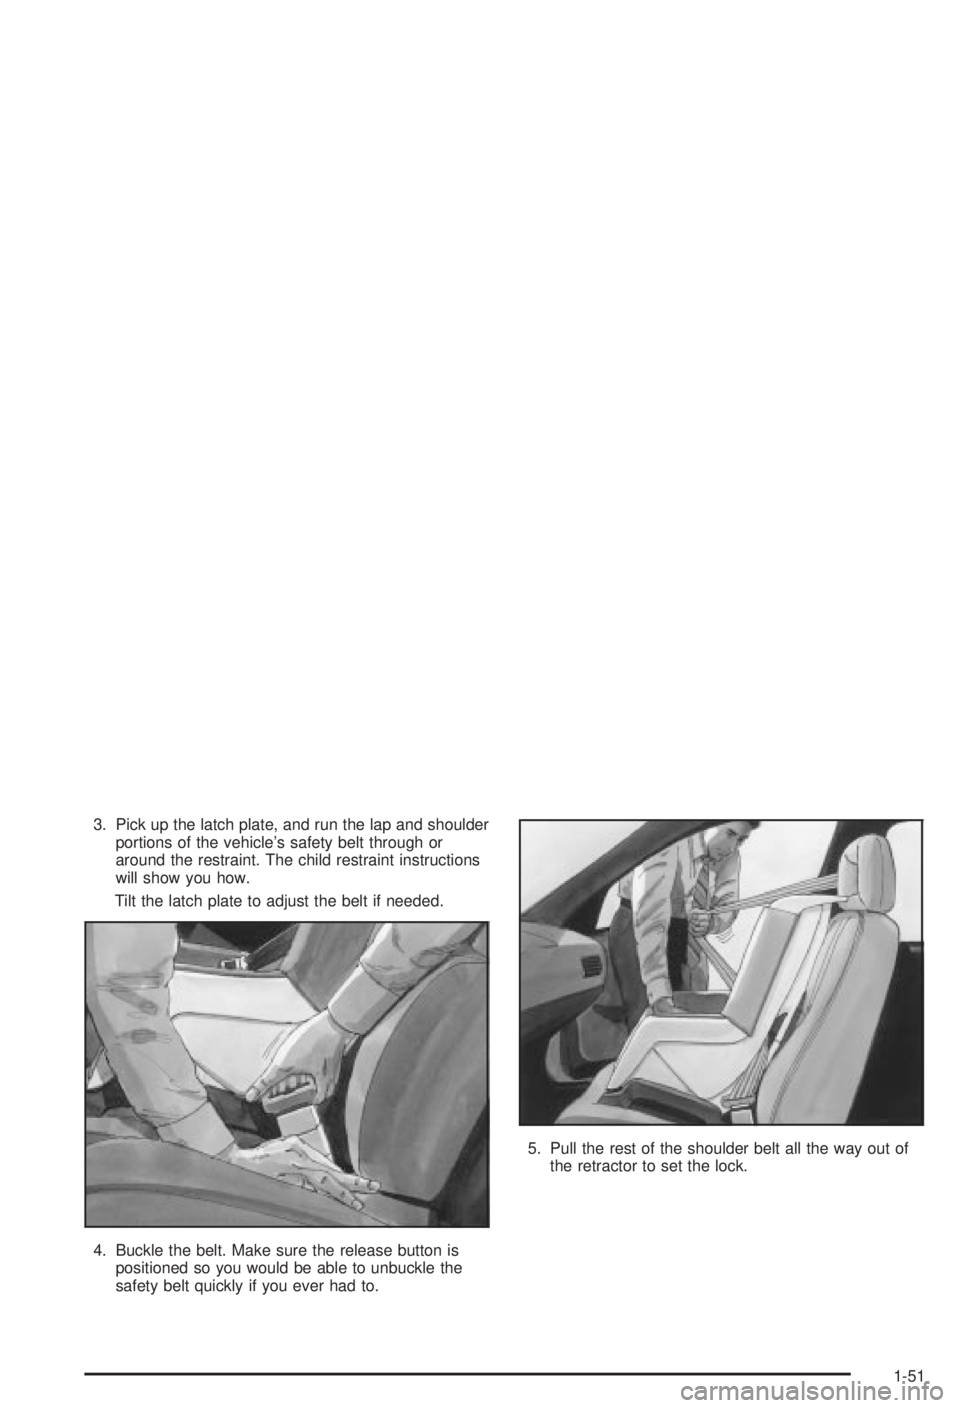 BUICK CENTURY 2003 User Guide 3. Pick up the latch plate, and run the lap and shoulder
portions of the vehicles safety belt through or
around the restraint. The child restraint instructions
will show you how.
Tilt the latch plate